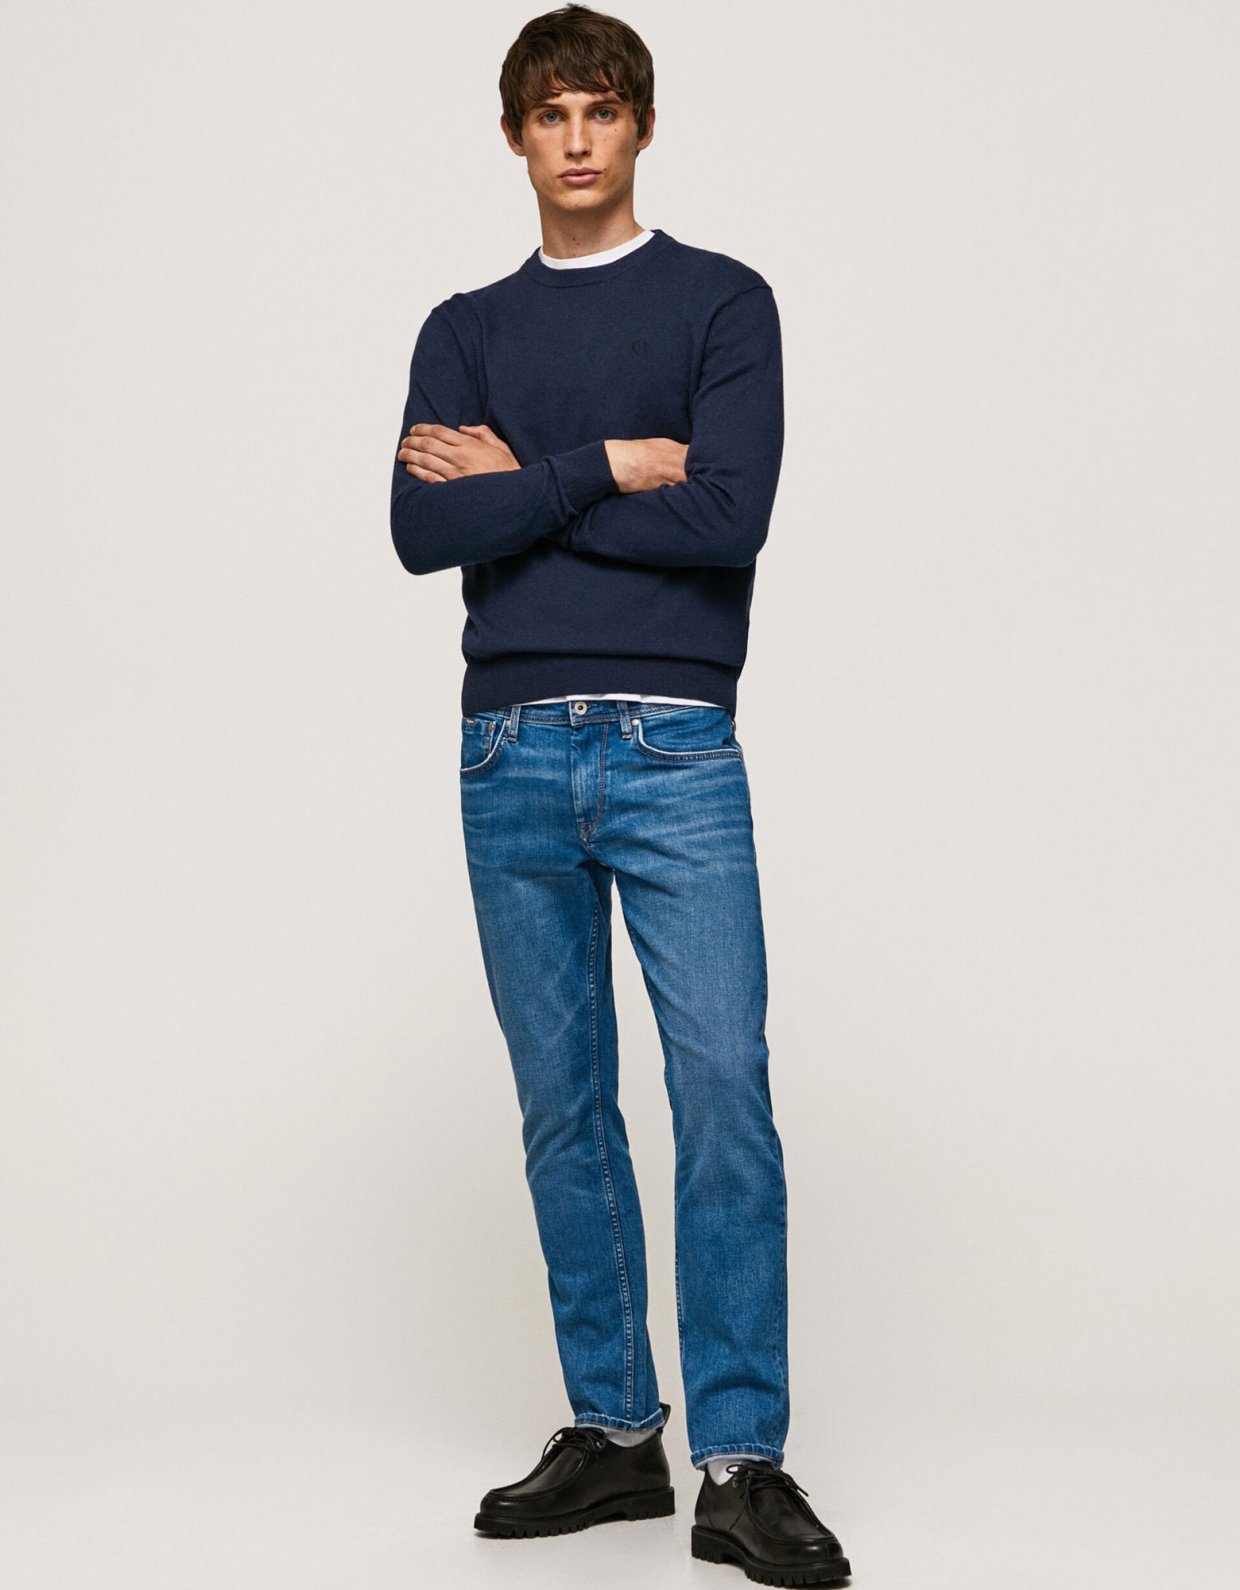 Pepe Jeans Andre crew neck dulwich